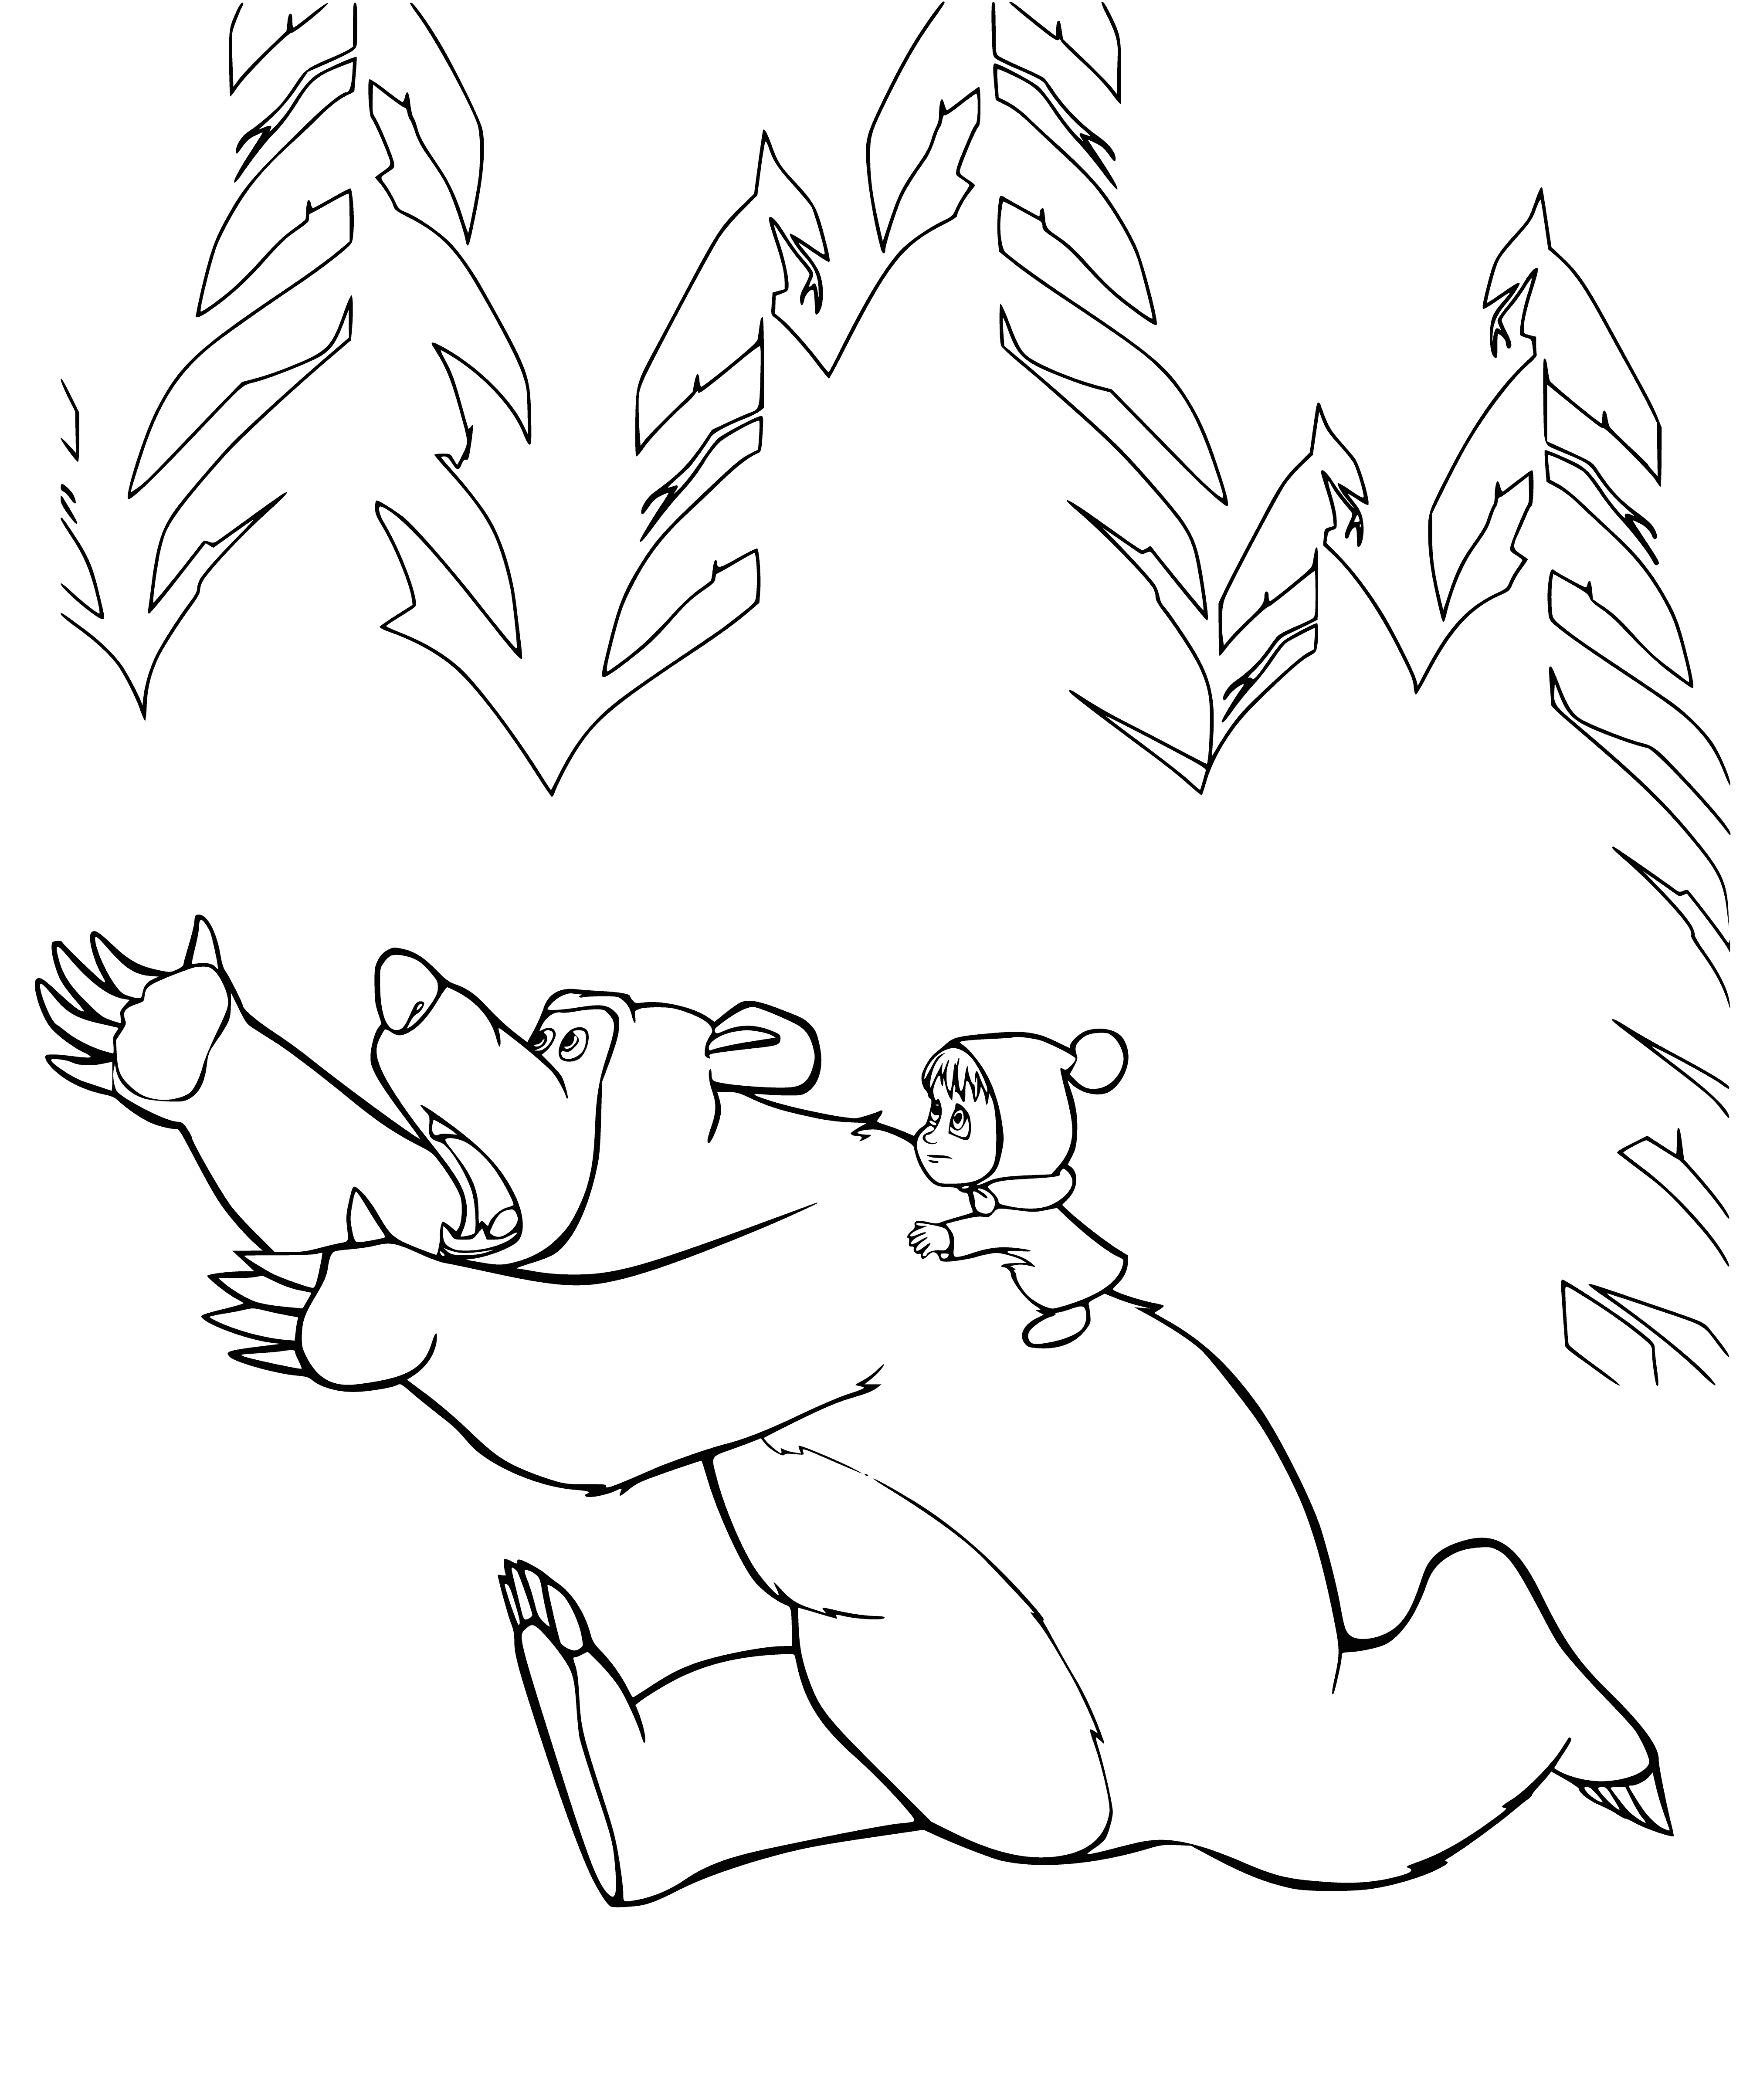 coloring page: Girl in green dress standing on bear head; trees in background. #ColoringBookAdventure